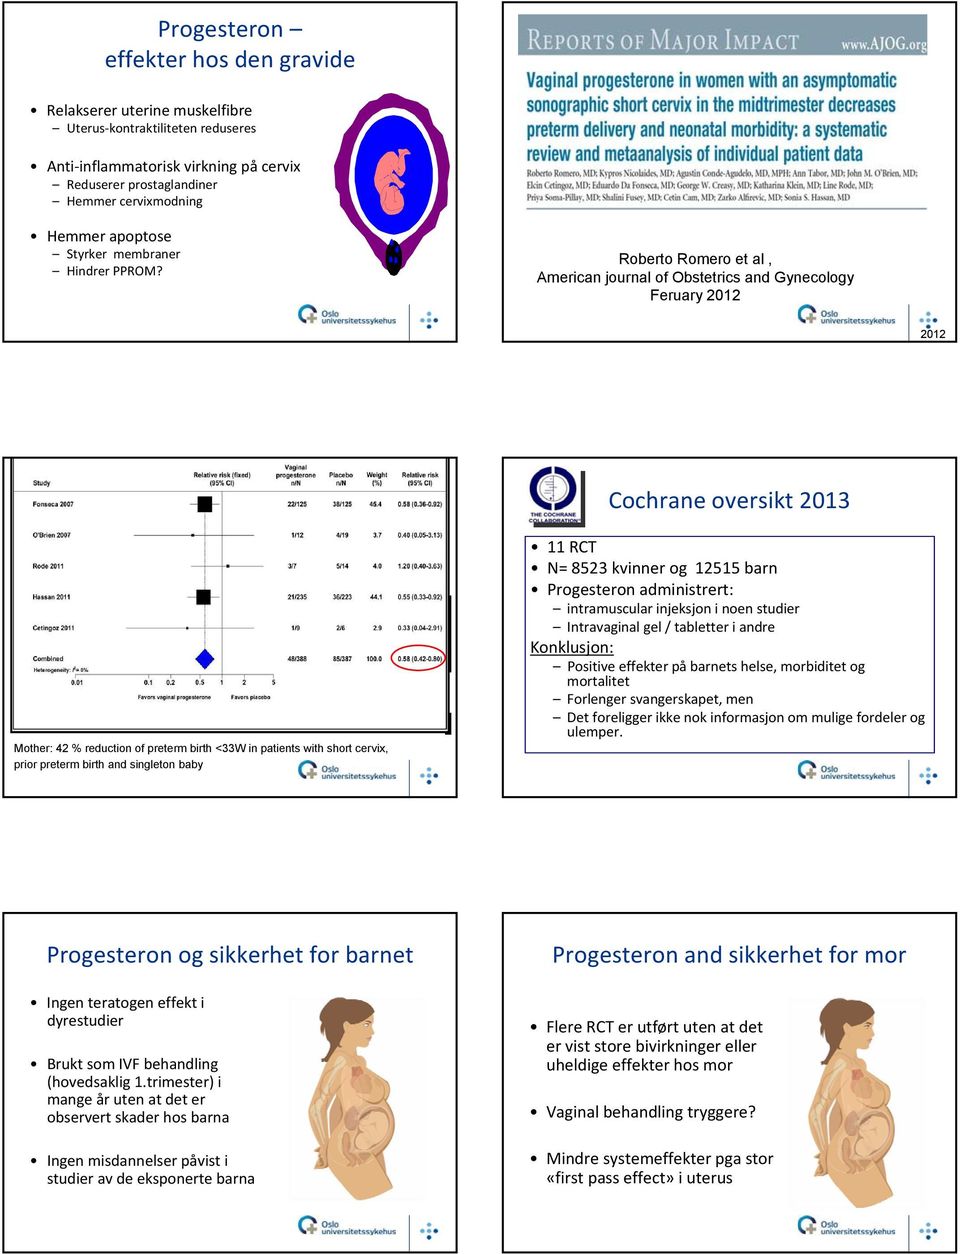 Roberto Romero et al, American journal of Obstetrics and Gynecology Feruary 2012 2012 Cochrane oversikt 2013 Mother: 42 % reduction of preterm birth <33W in patients with short cervix, prior preterm